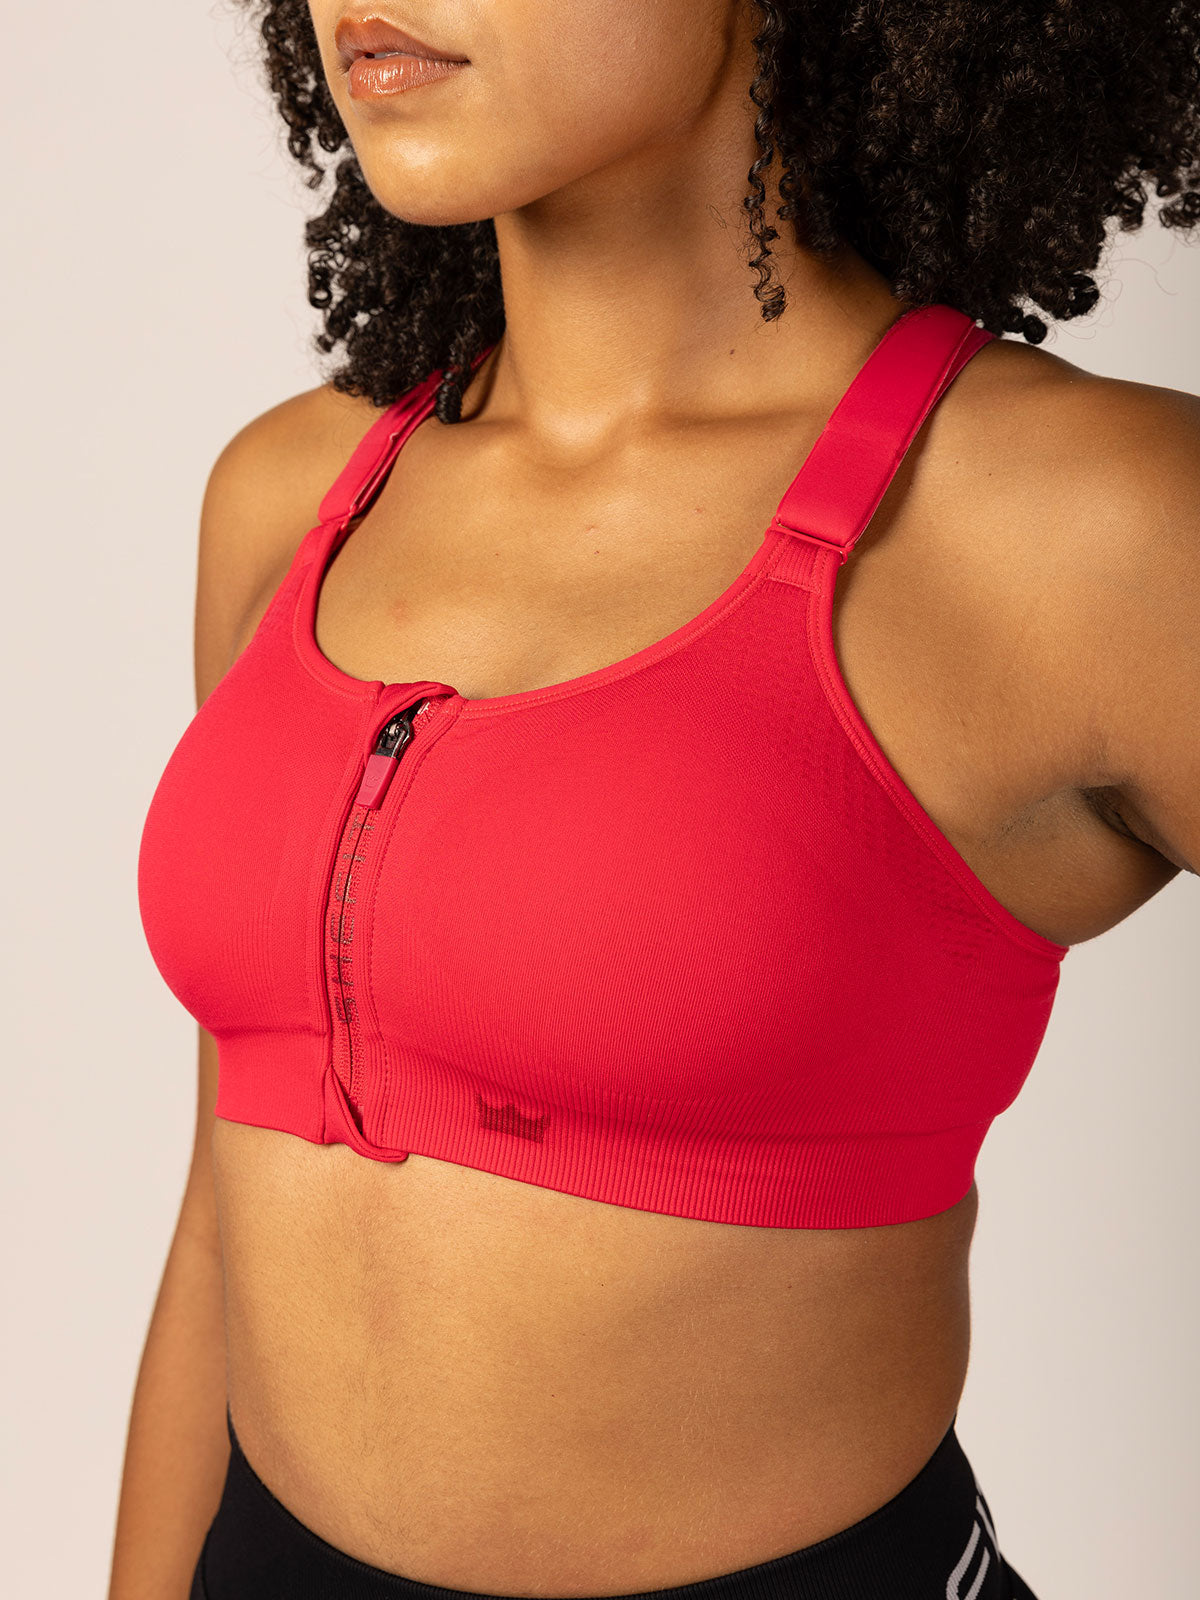 SHEFIT® on X: Lights, camera, action! SHEFIT's newest color in our Ultimate  Sports Bra: Viva Magenta launch day is officially here. The Shefit Ultimate  Sports Bra is known for no bounce and